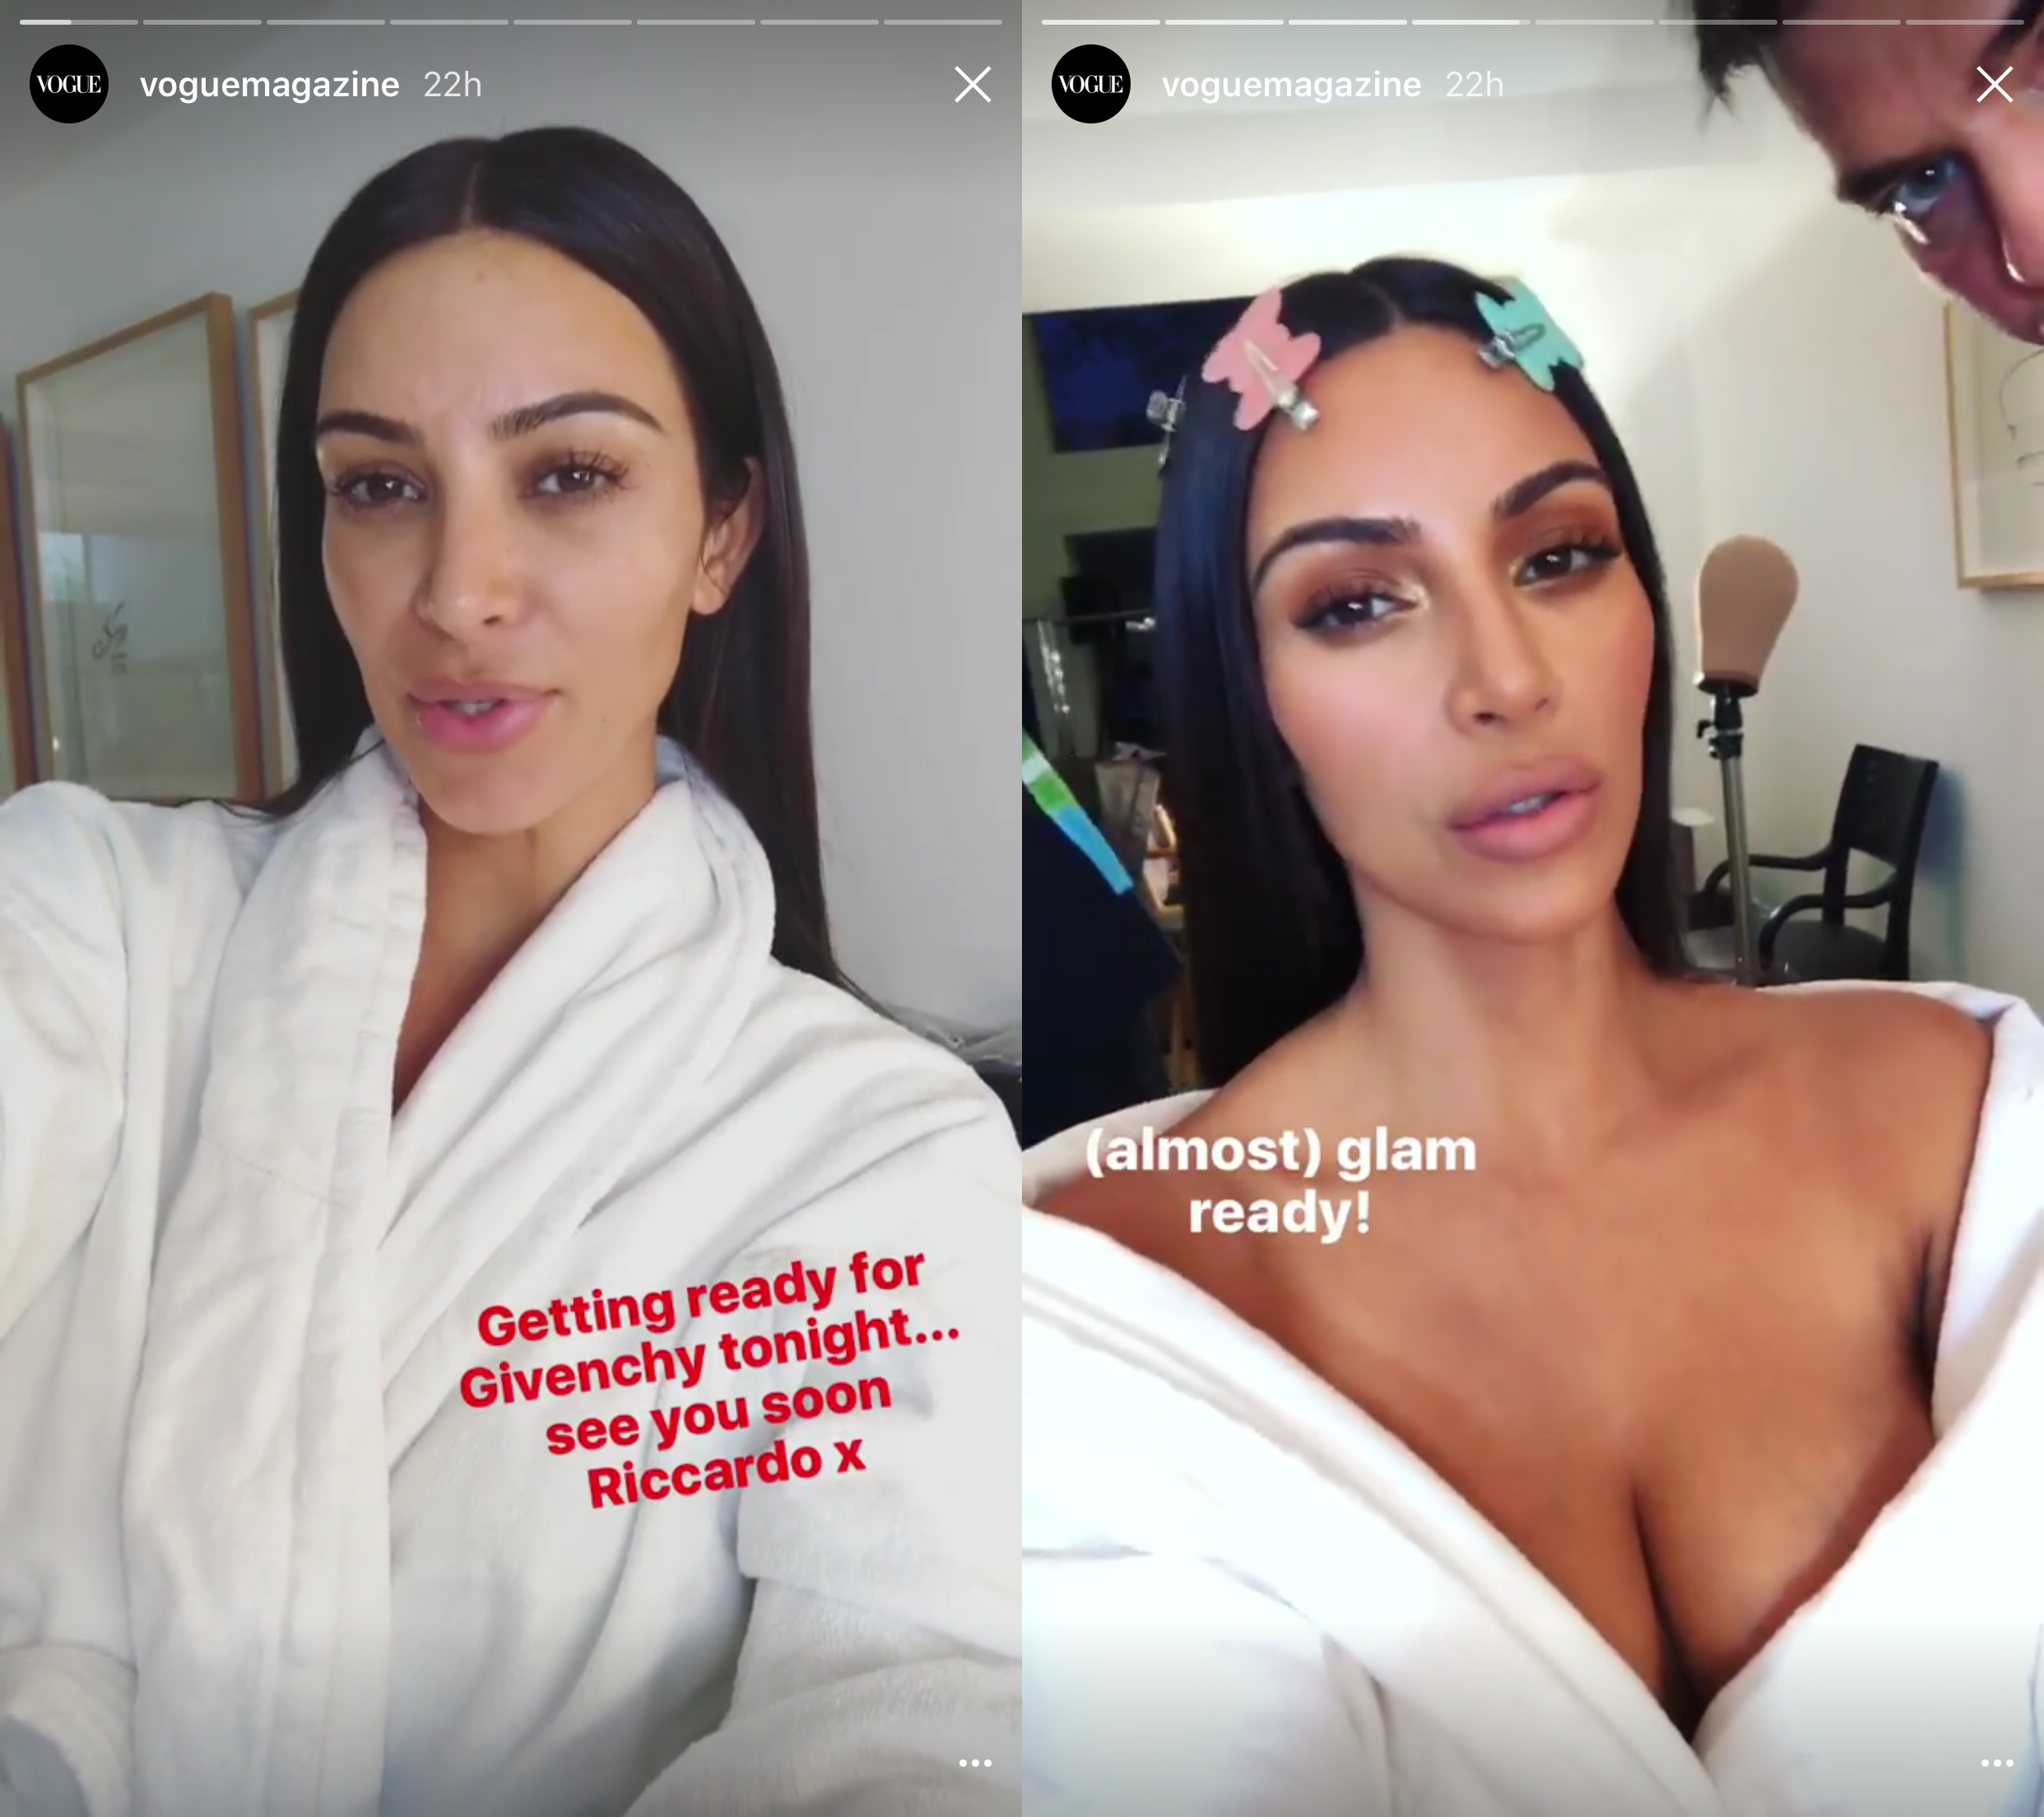 What Could Kim Kardashian’s Robbers Learn From Her Social Media Posts?